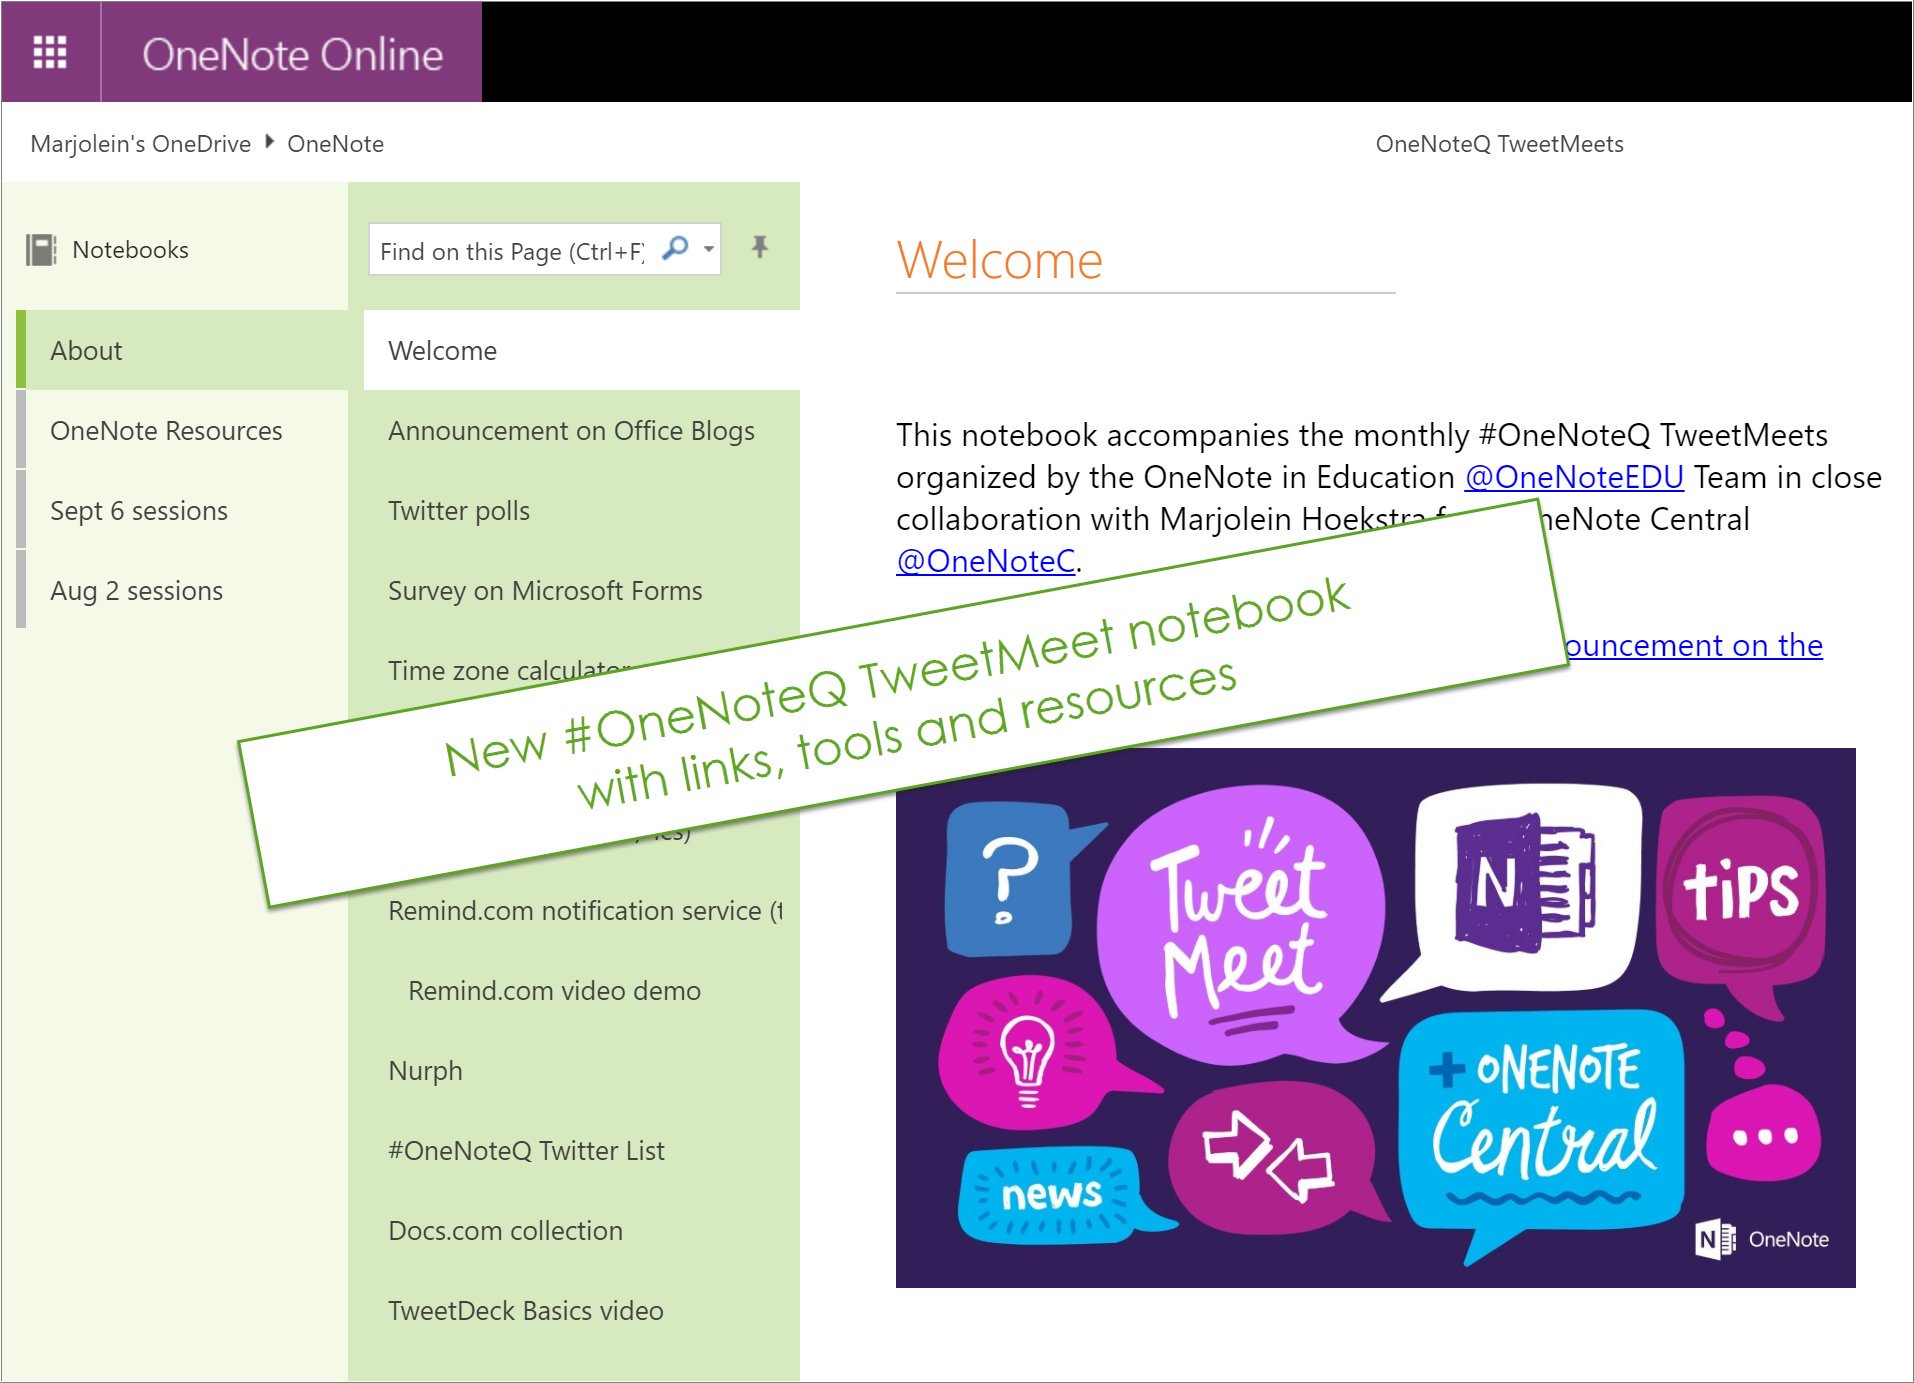 Links, tools and resources related to #OneNoteQ TweetMeets as a handy #OneNote notebook:
https://t.co/SSmIgvJrH8 https://t.co/Pet9kkzwNt